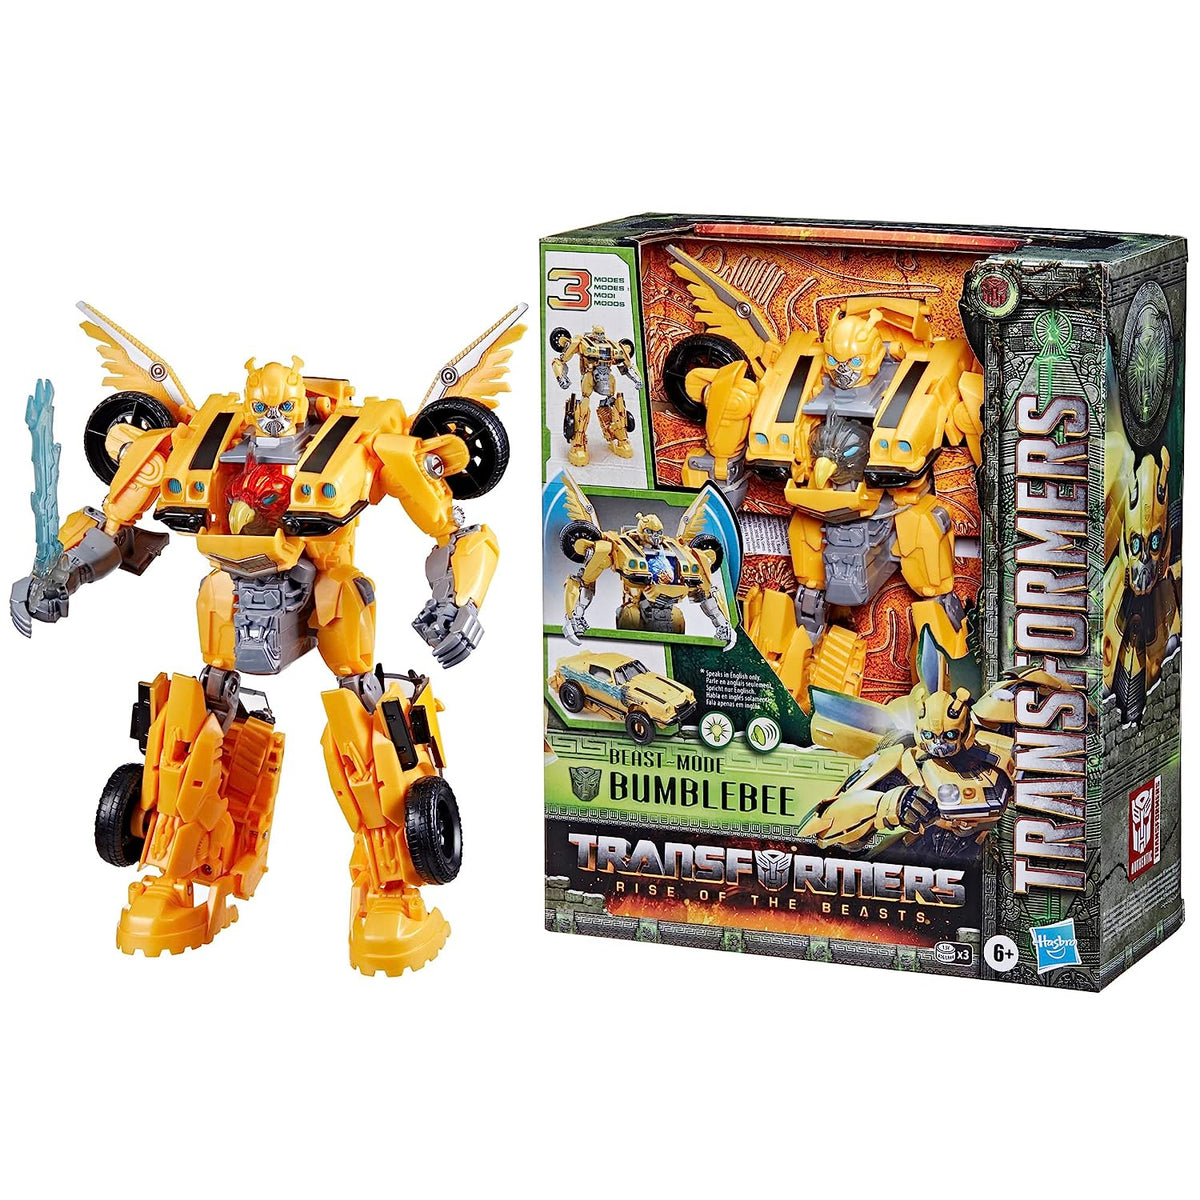 Transformers Rise of The Beasts Movie 10 Inch Beast Mode Bumblebee Converting Toy with Lights and Sounds for Ages 6 Years and Up